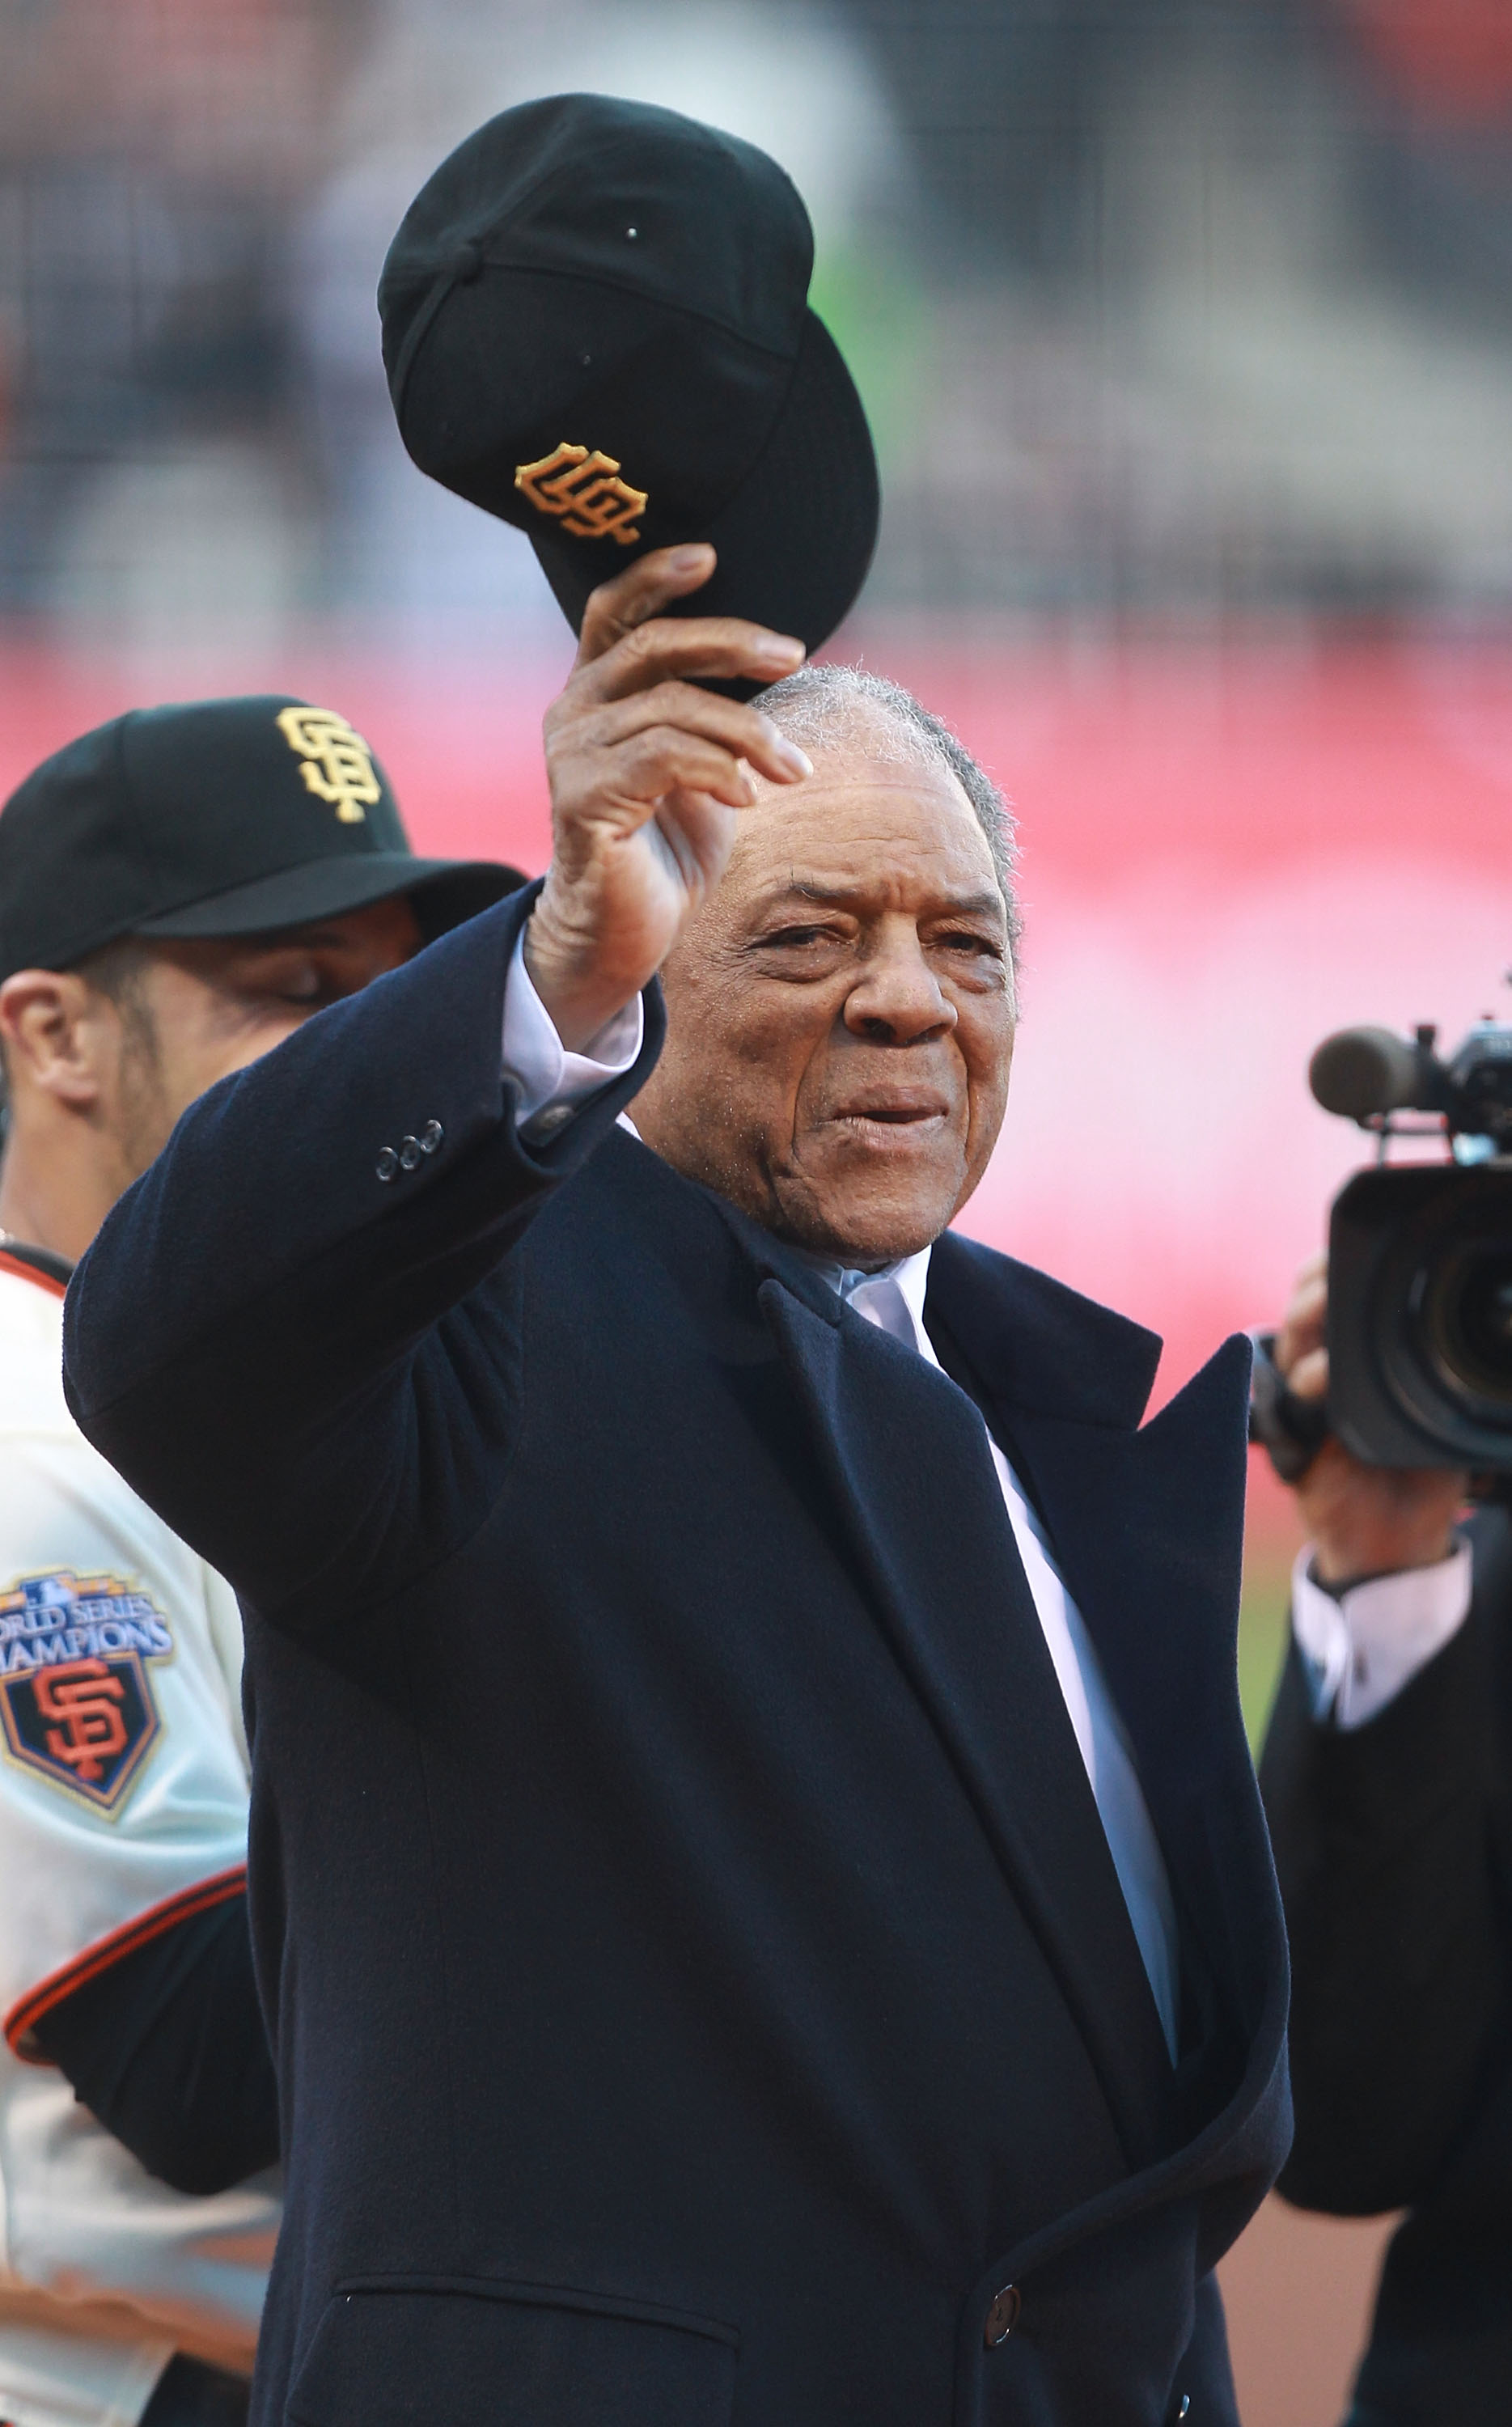 SAN FRANCISCO, CA - APRIL 09:  Former Gmember of the San Francisco Giants Willie Mays waves to the crowd before recieving his World Series against the St. Louis Cardinals  at AT&T Park on April 9, 2011 in San Francisco, California.  (Photo by Jed Jacobsoh